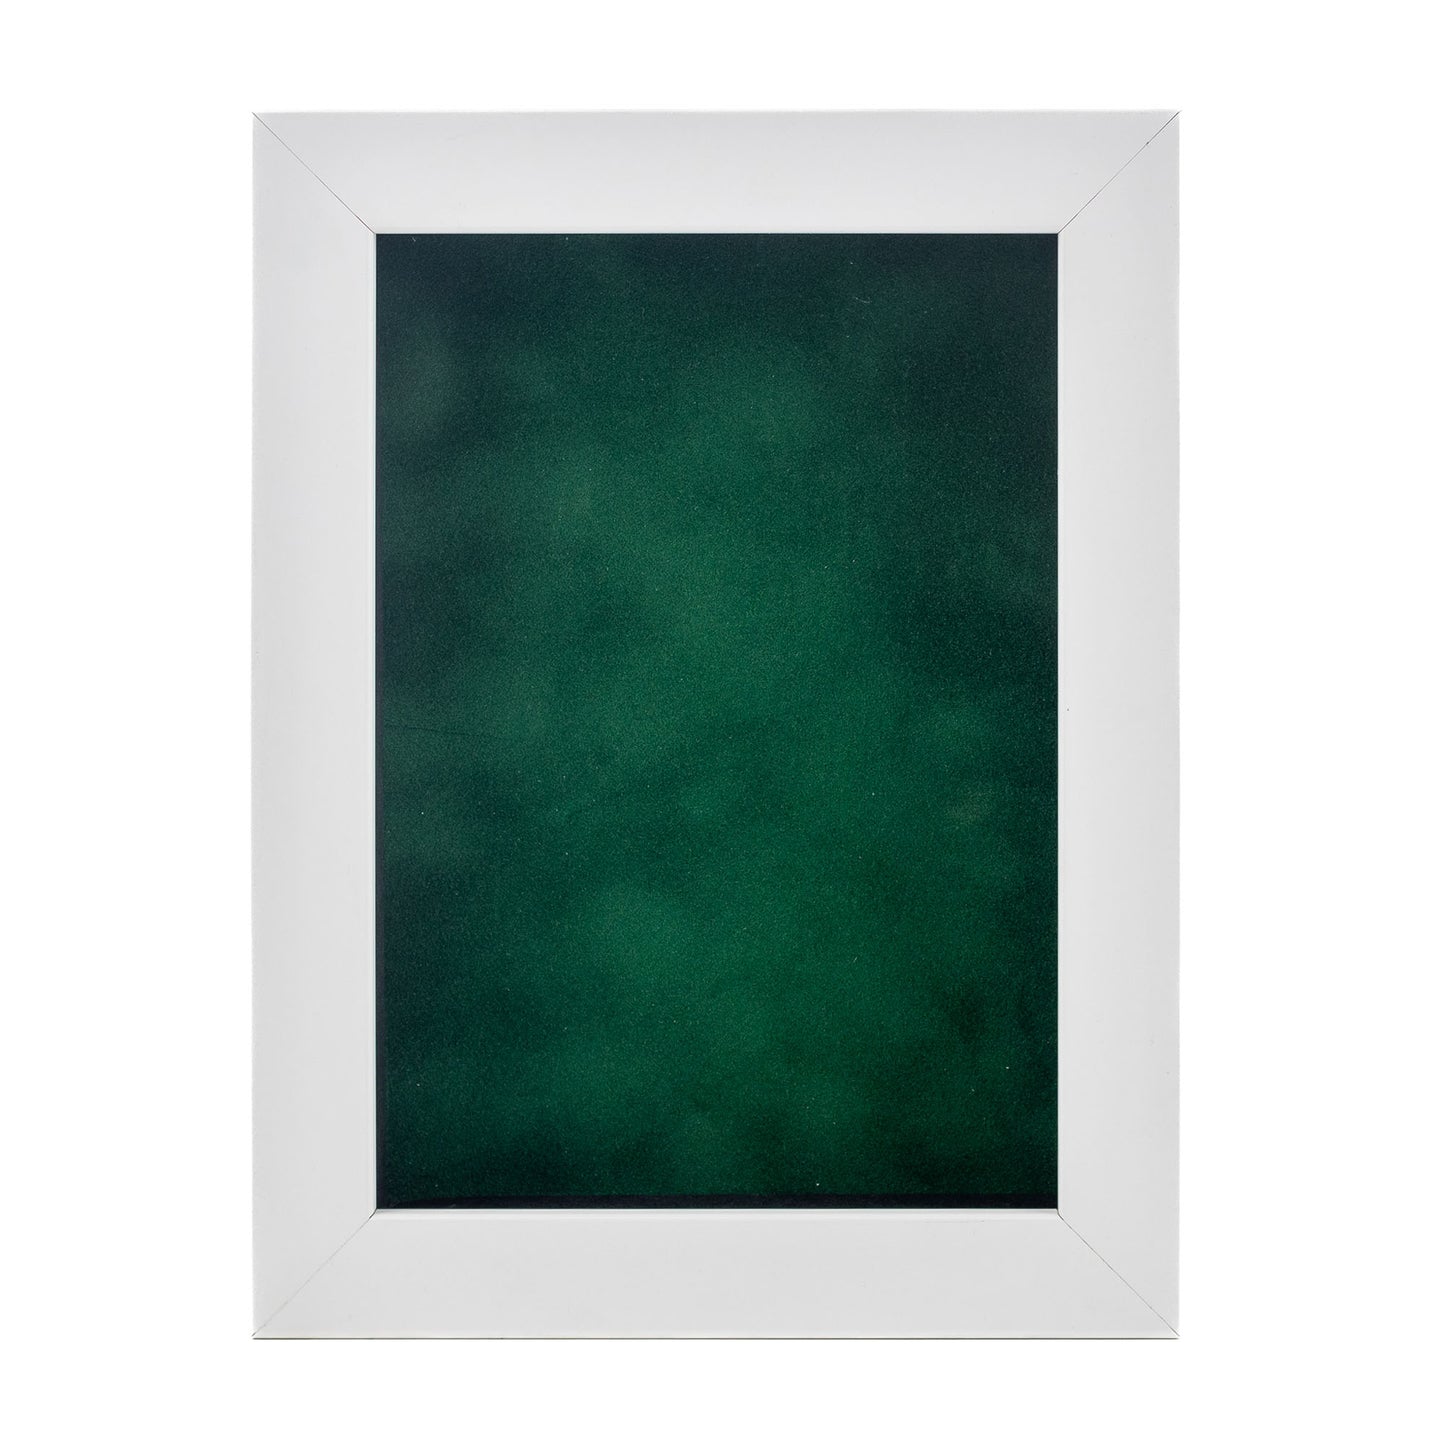 White Shadow Box Frame With Forest Green Acid-Free Suede Backing